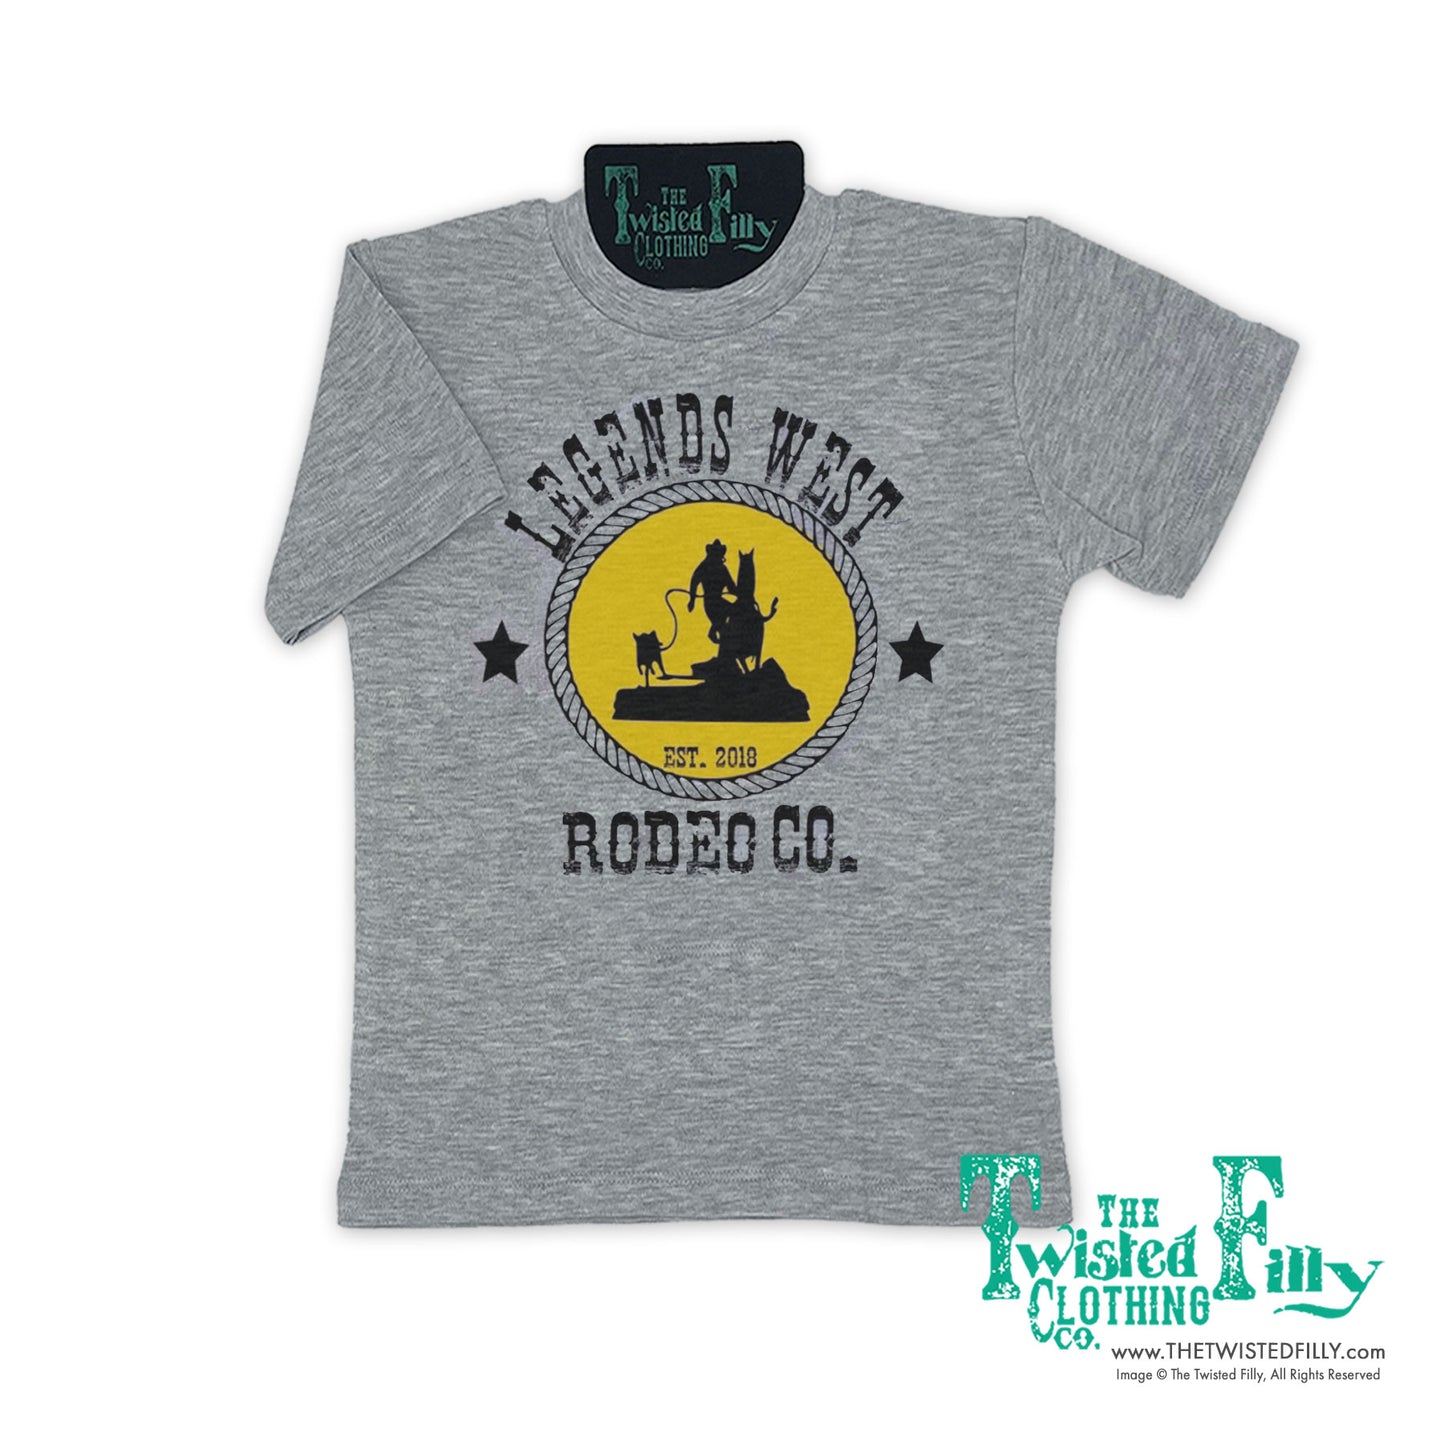 Legends West Rodeo Co. Calf Roper - S/S Toddler Tee - Gray